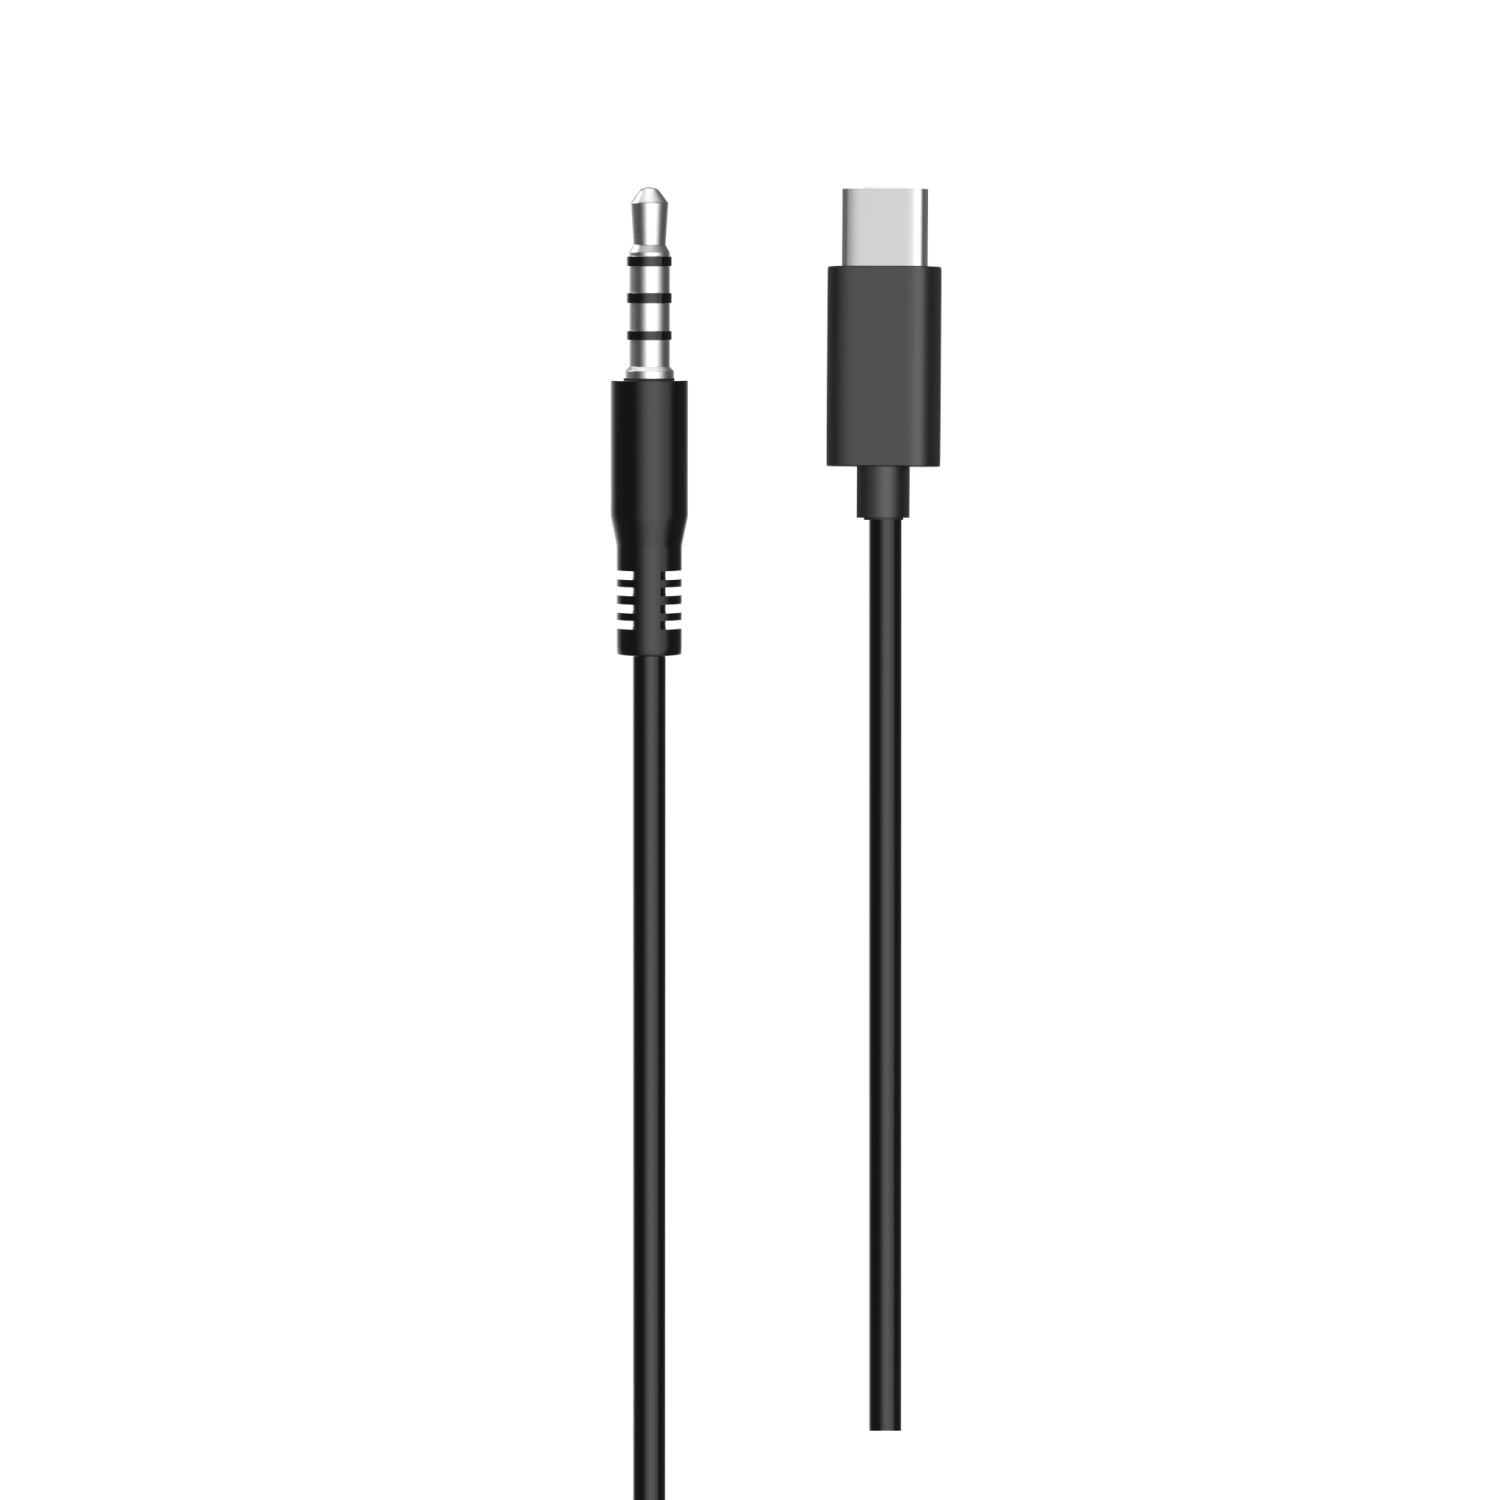 Digitek 3.5mm TRRS Type-C Connector Audio Cable With Smartphone